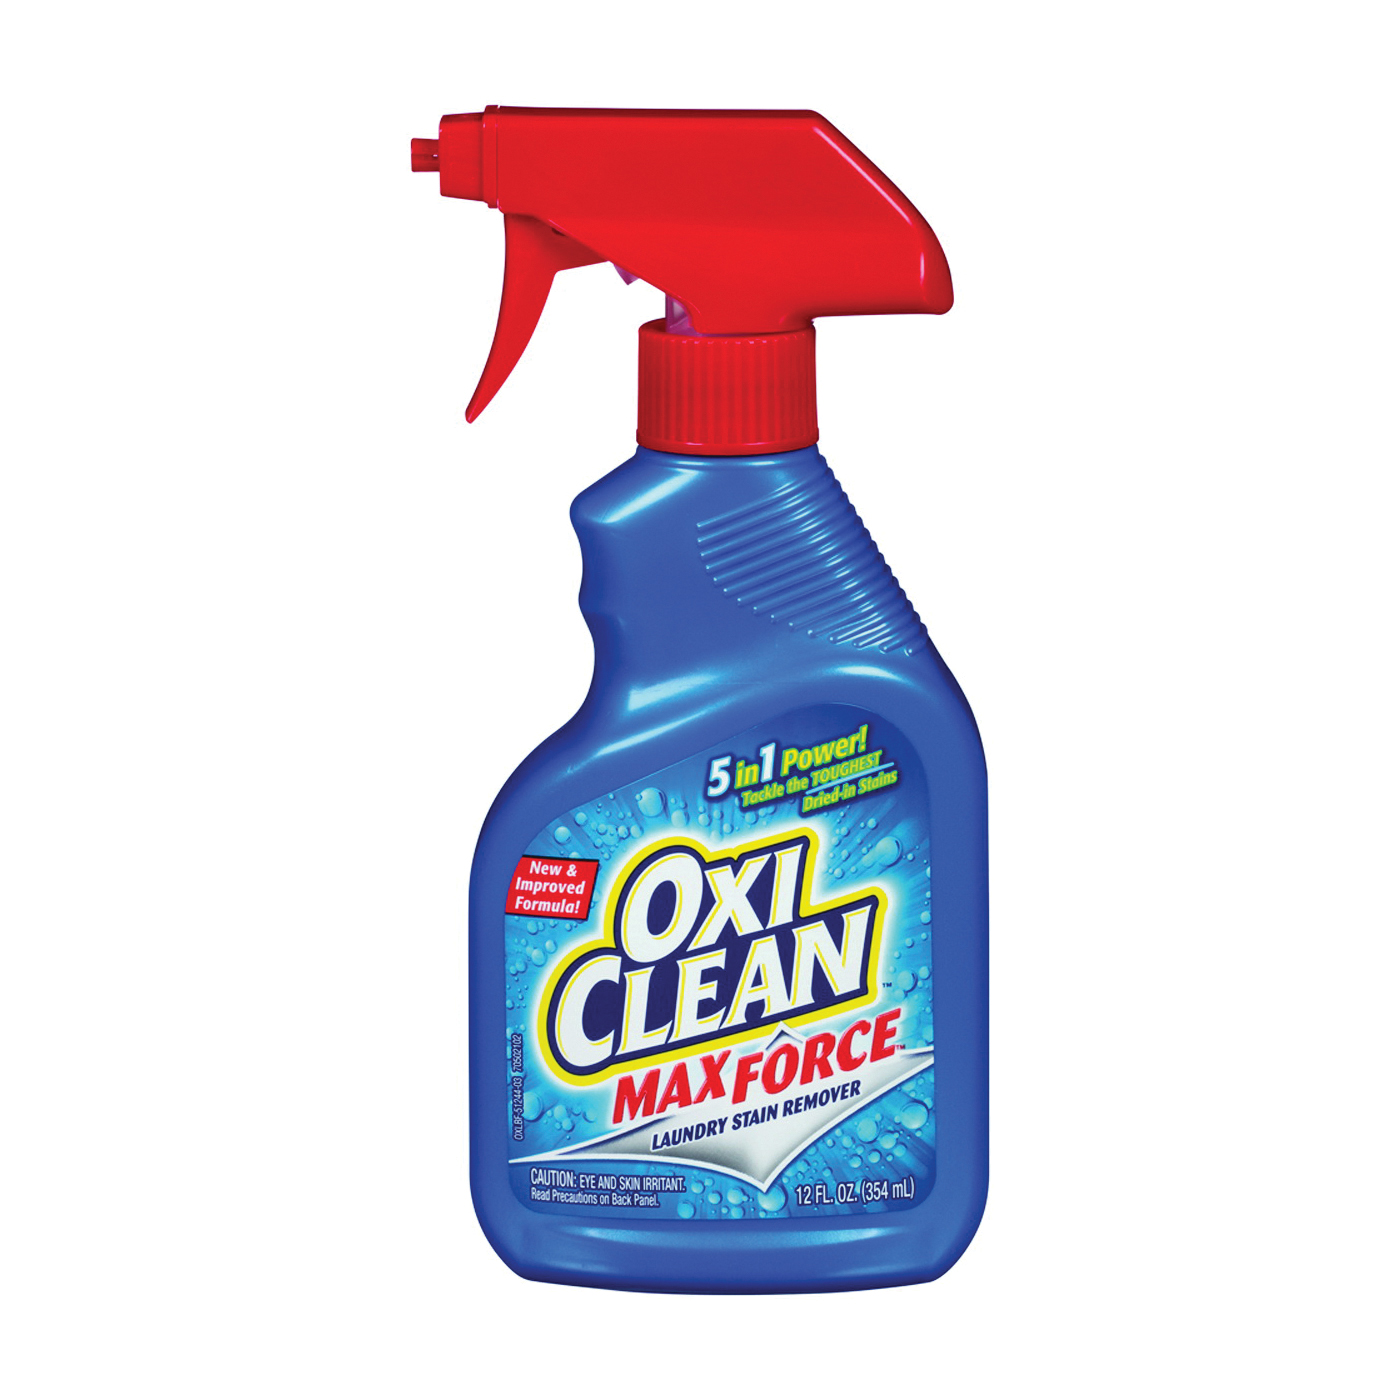 Oxiclean Max Force 51244 Stain Remover, 12 oz, Bottle, Liquid, Opaque White - 1